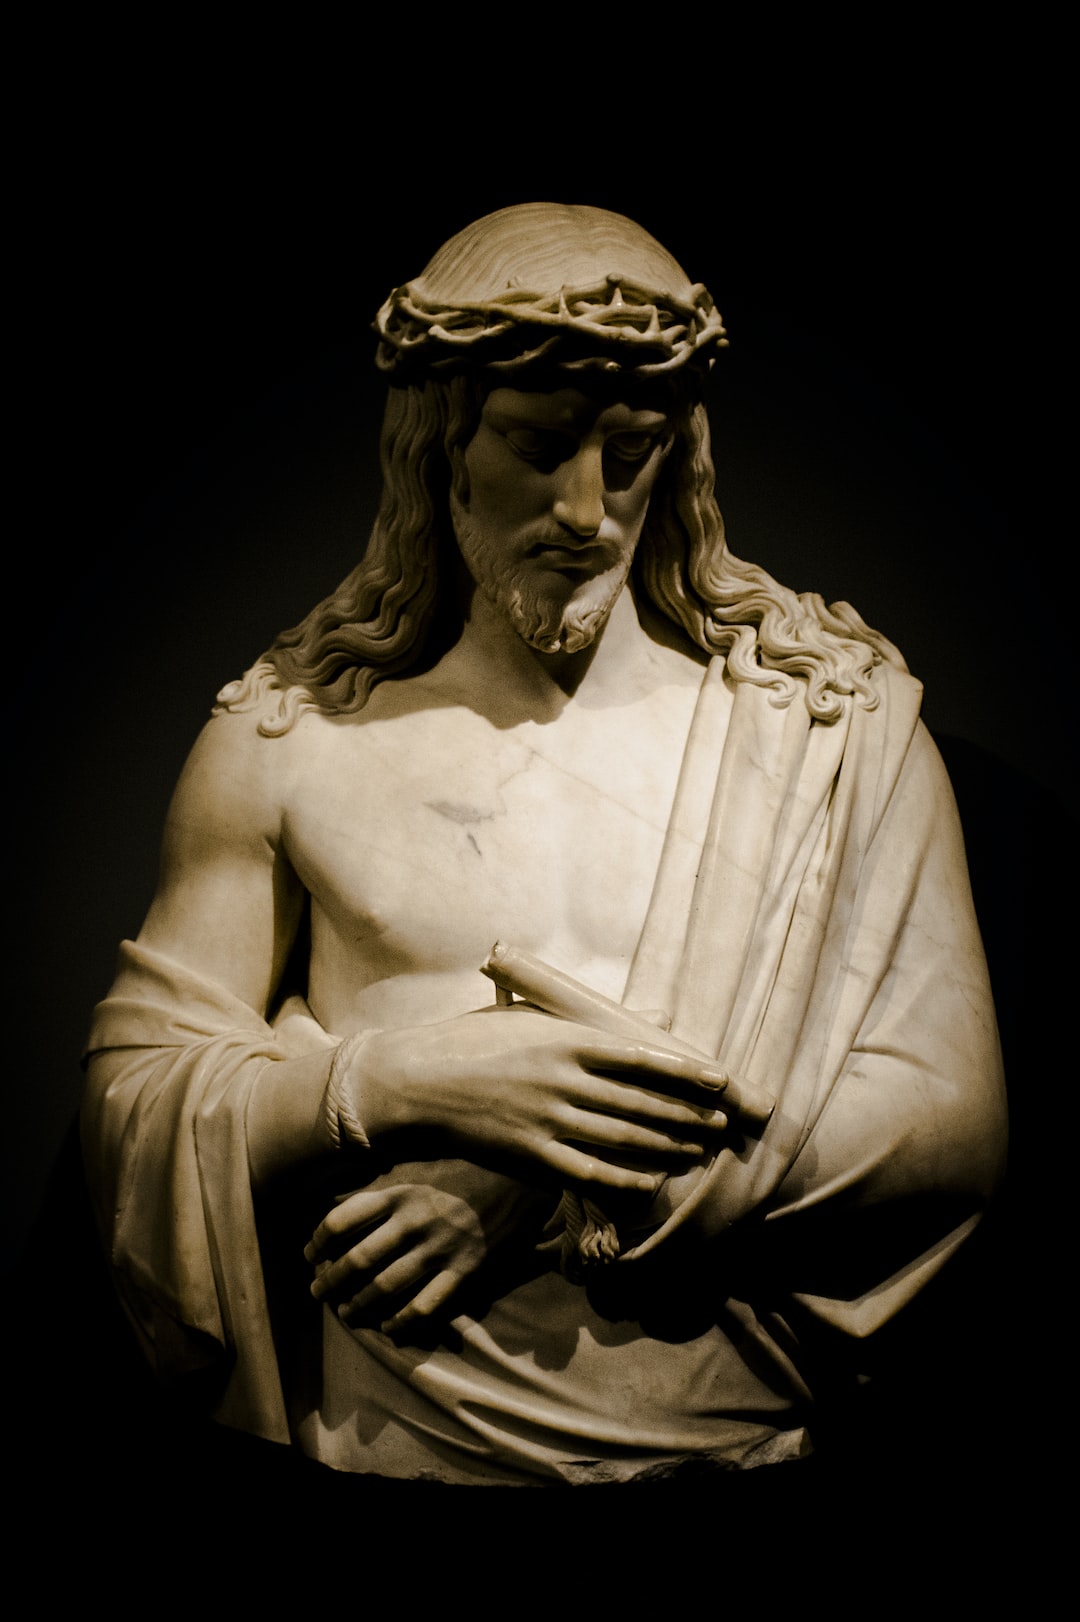 A statue of Jesus with a crown of thorns holding a cross. - Jesus